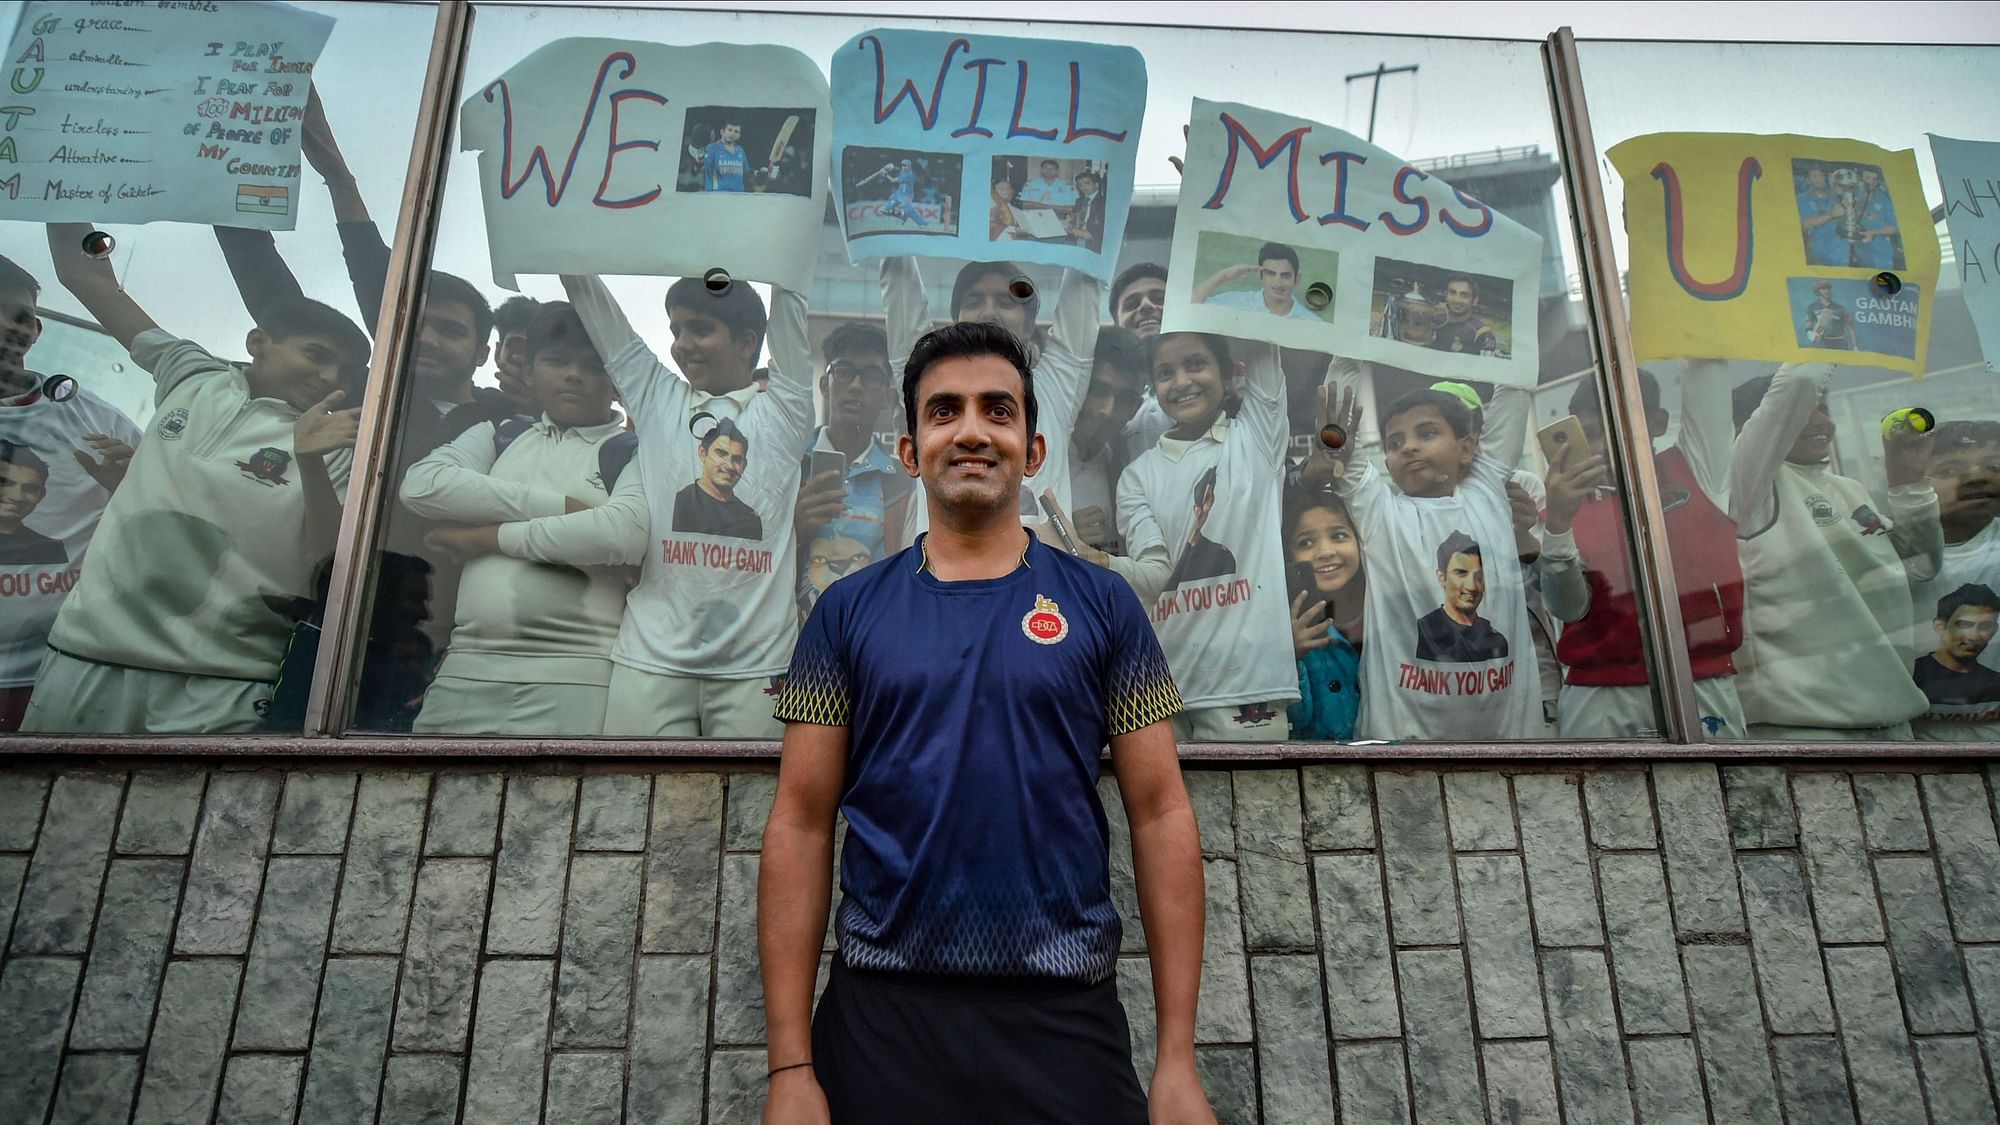 Cricketer Gautam Gambhir poses for photos with his fans in his last cricket match before retirement.